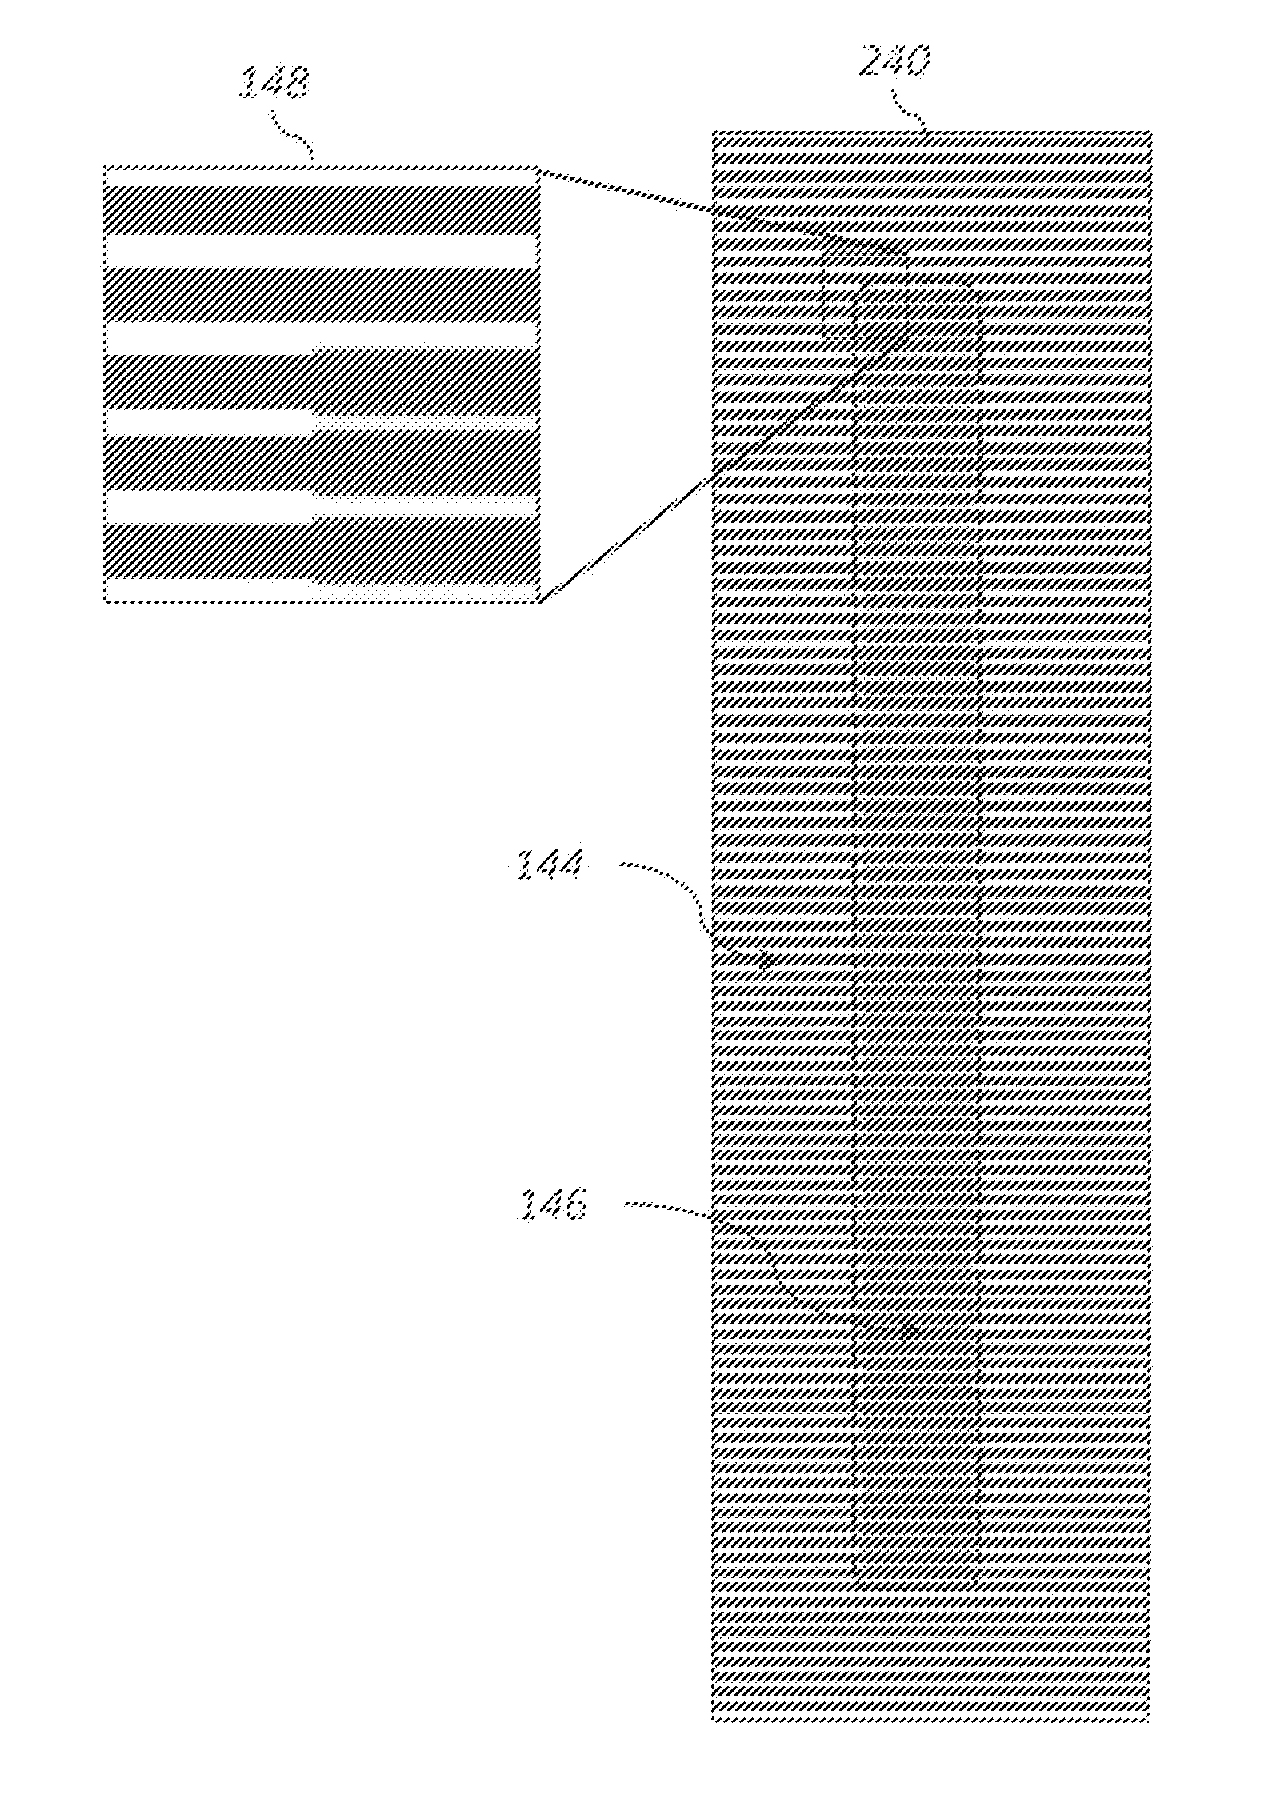 Image authentication using material penetration characteristics